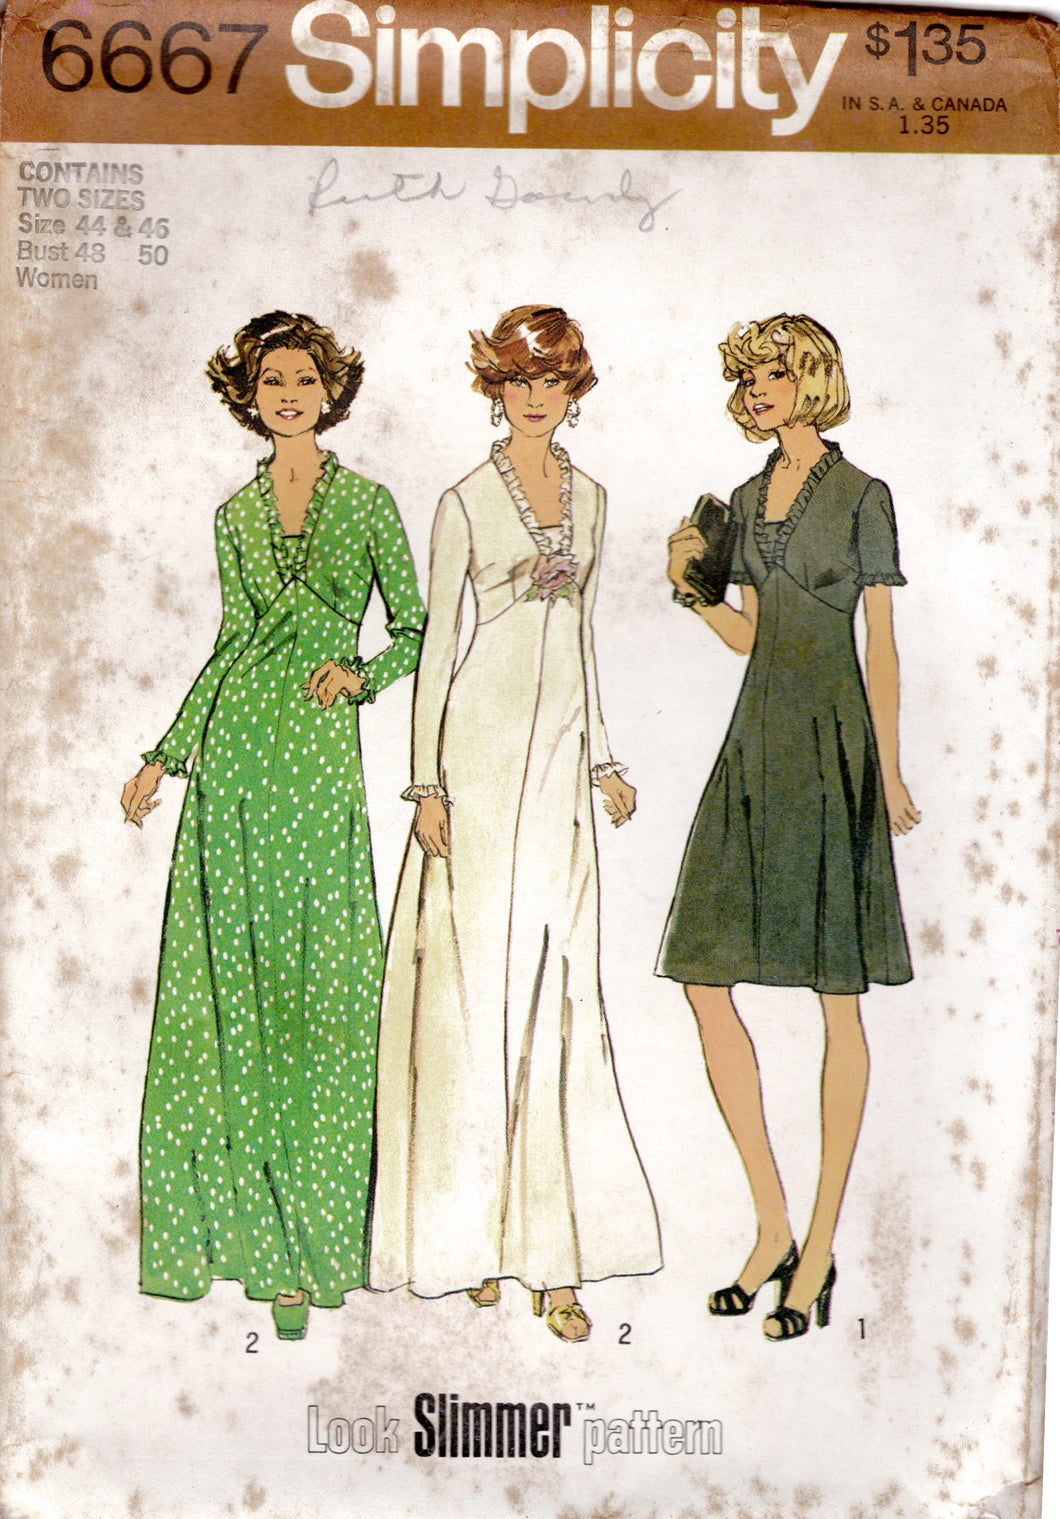 1970's Simplicity Midi or Maxi Dress Pattern with Empire Waist and V Neckline - Bust 48-50